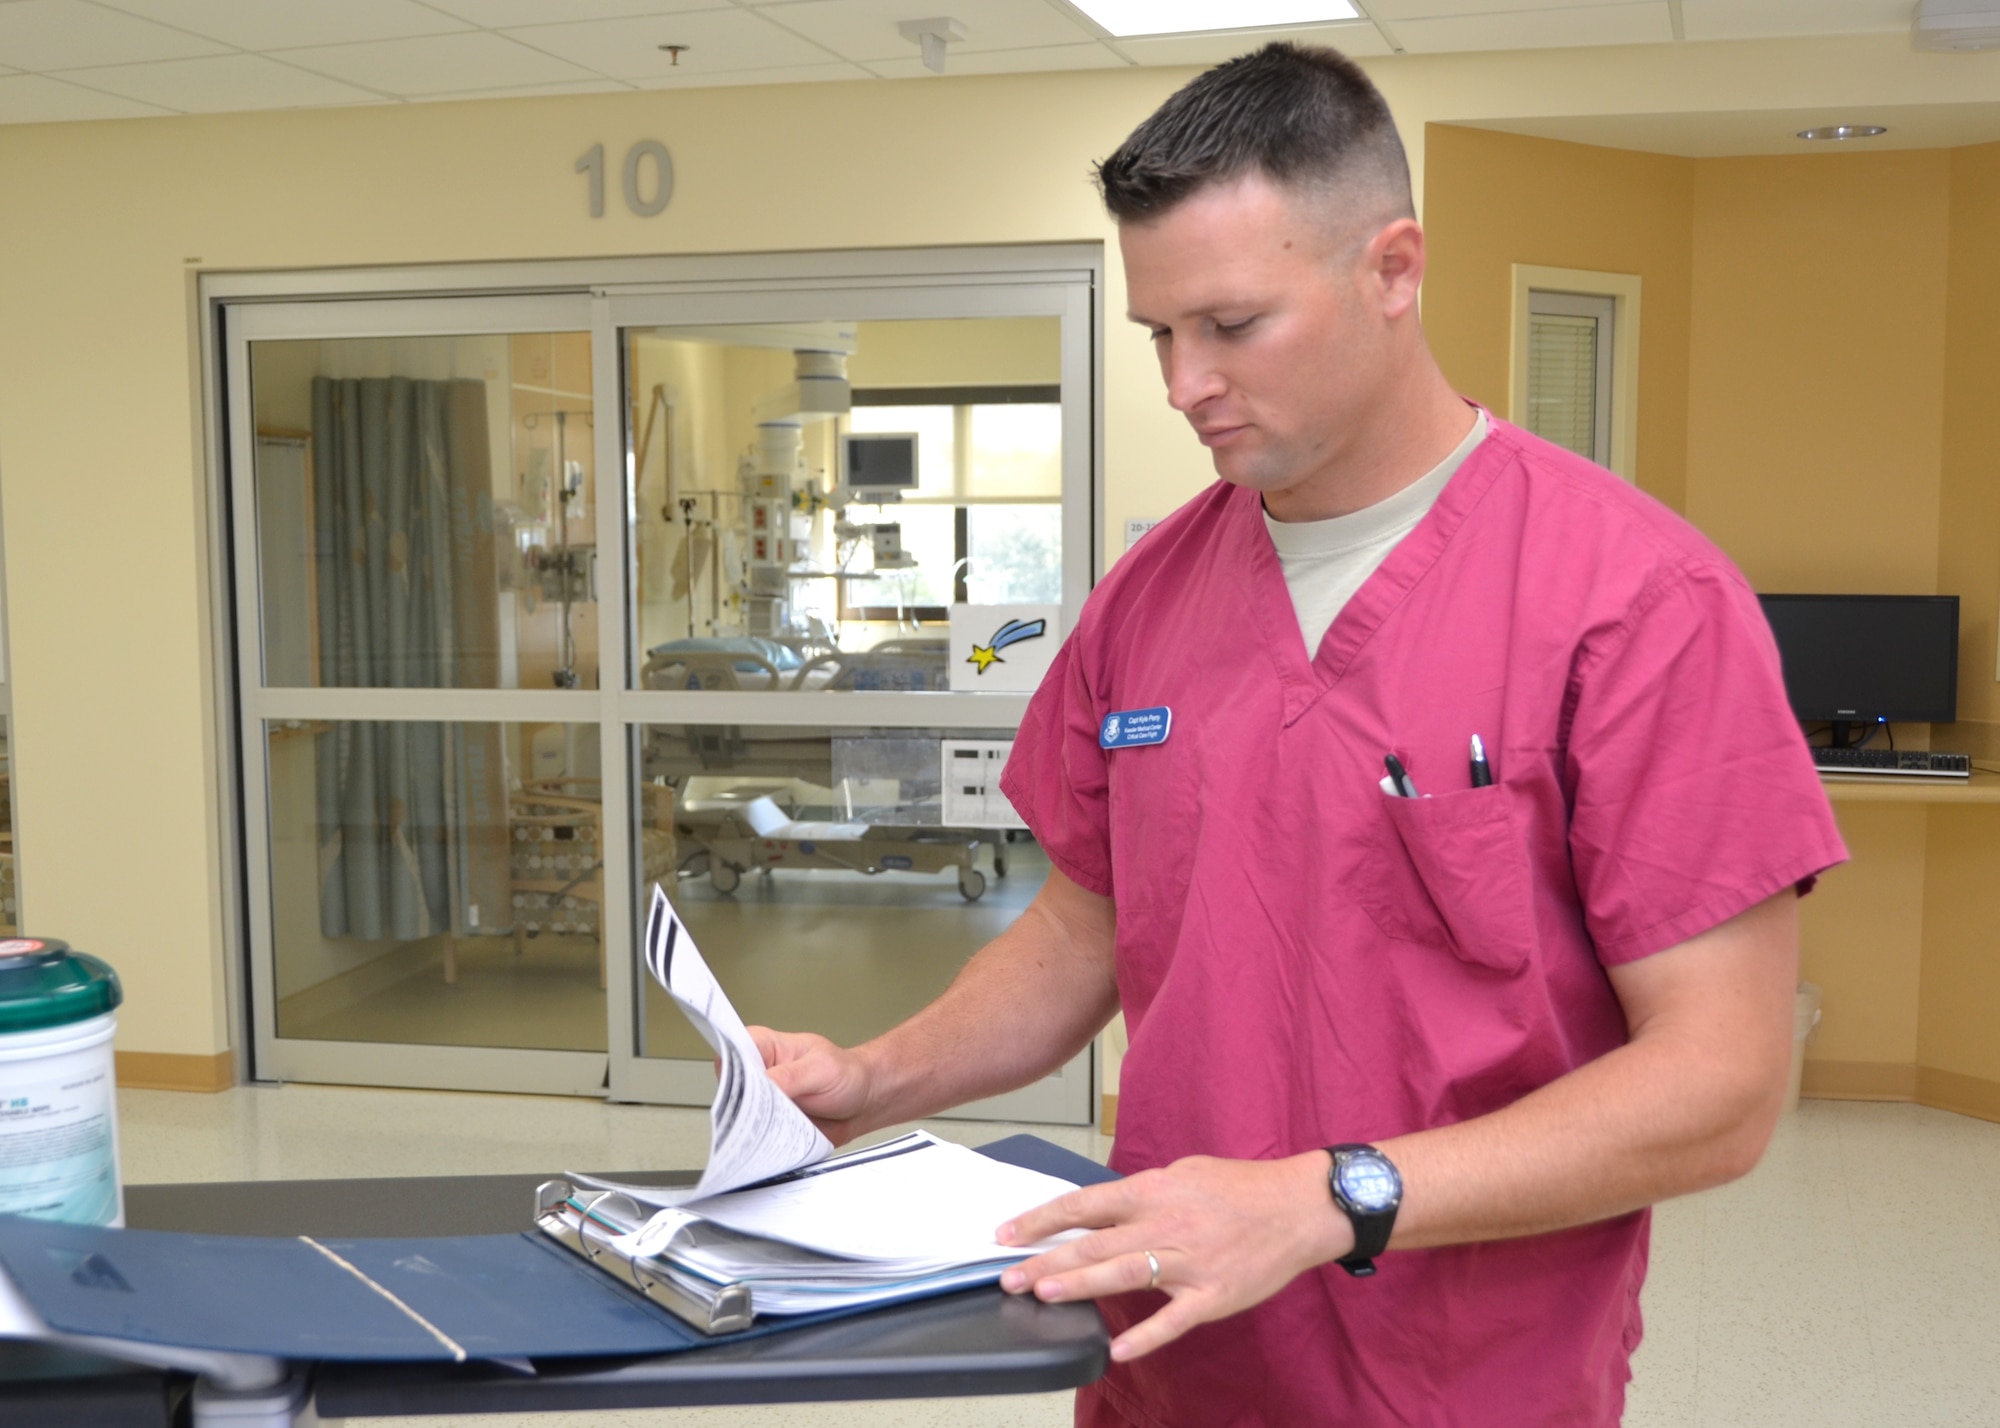 Capt. Kyle Perry, 81st Inpatient Operations Squadron, reviews a patient’s chart at the Intensive Care Unit nurses’ station March 6, 2013, at the Keesler Medical Center, Keesler Air Force Base, Miss. Perry was selected to be part of the White House clinic and reports in October for a three-year assignment. (U.S. Air Force photo by Steve Pivnick)